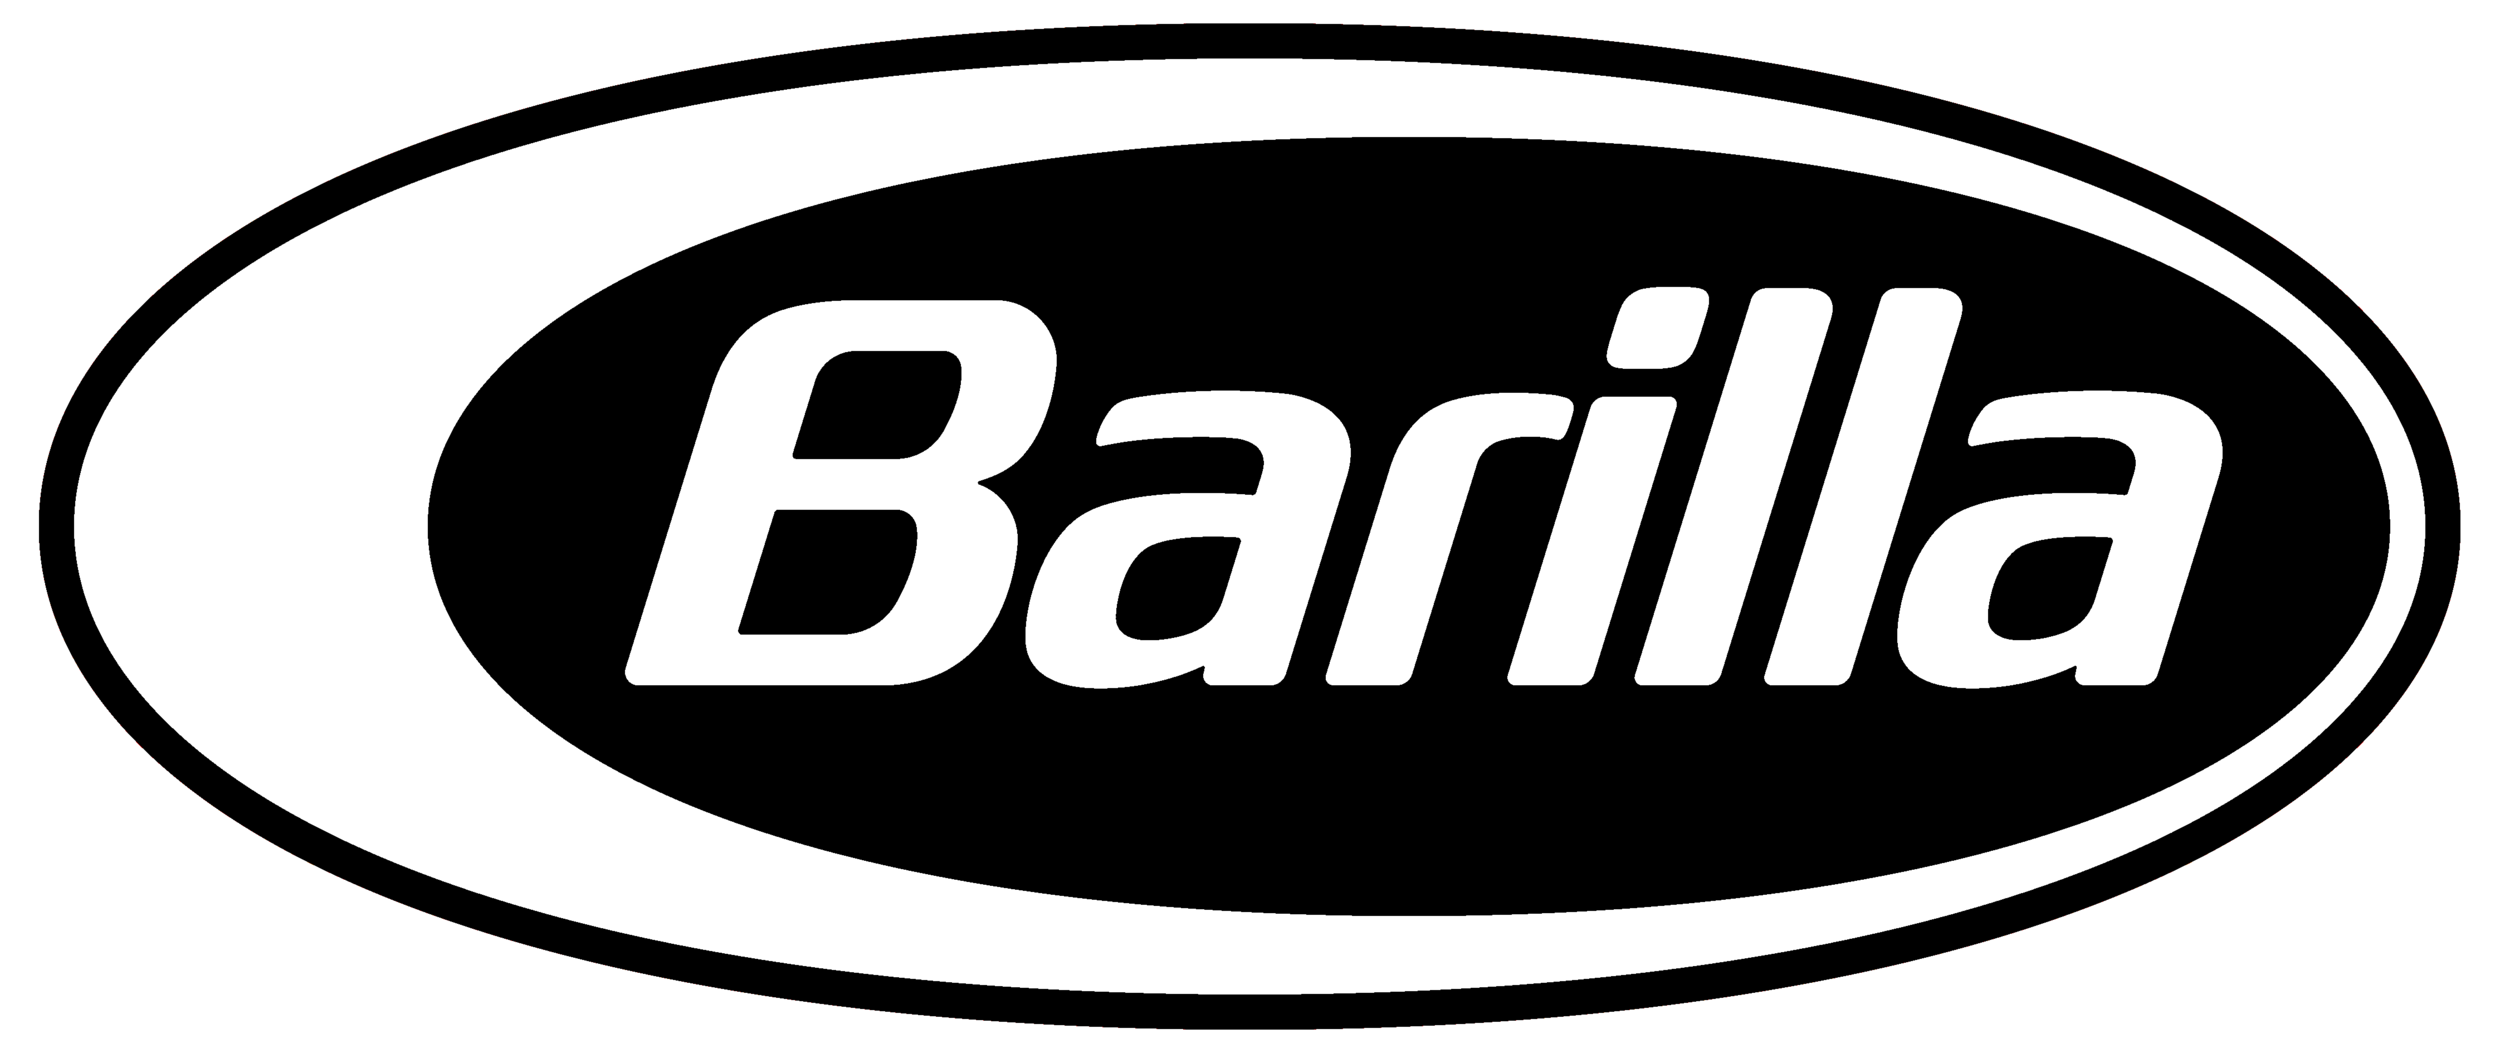 LOGO_BARILLA_BW_OUTLINE_NEW.png